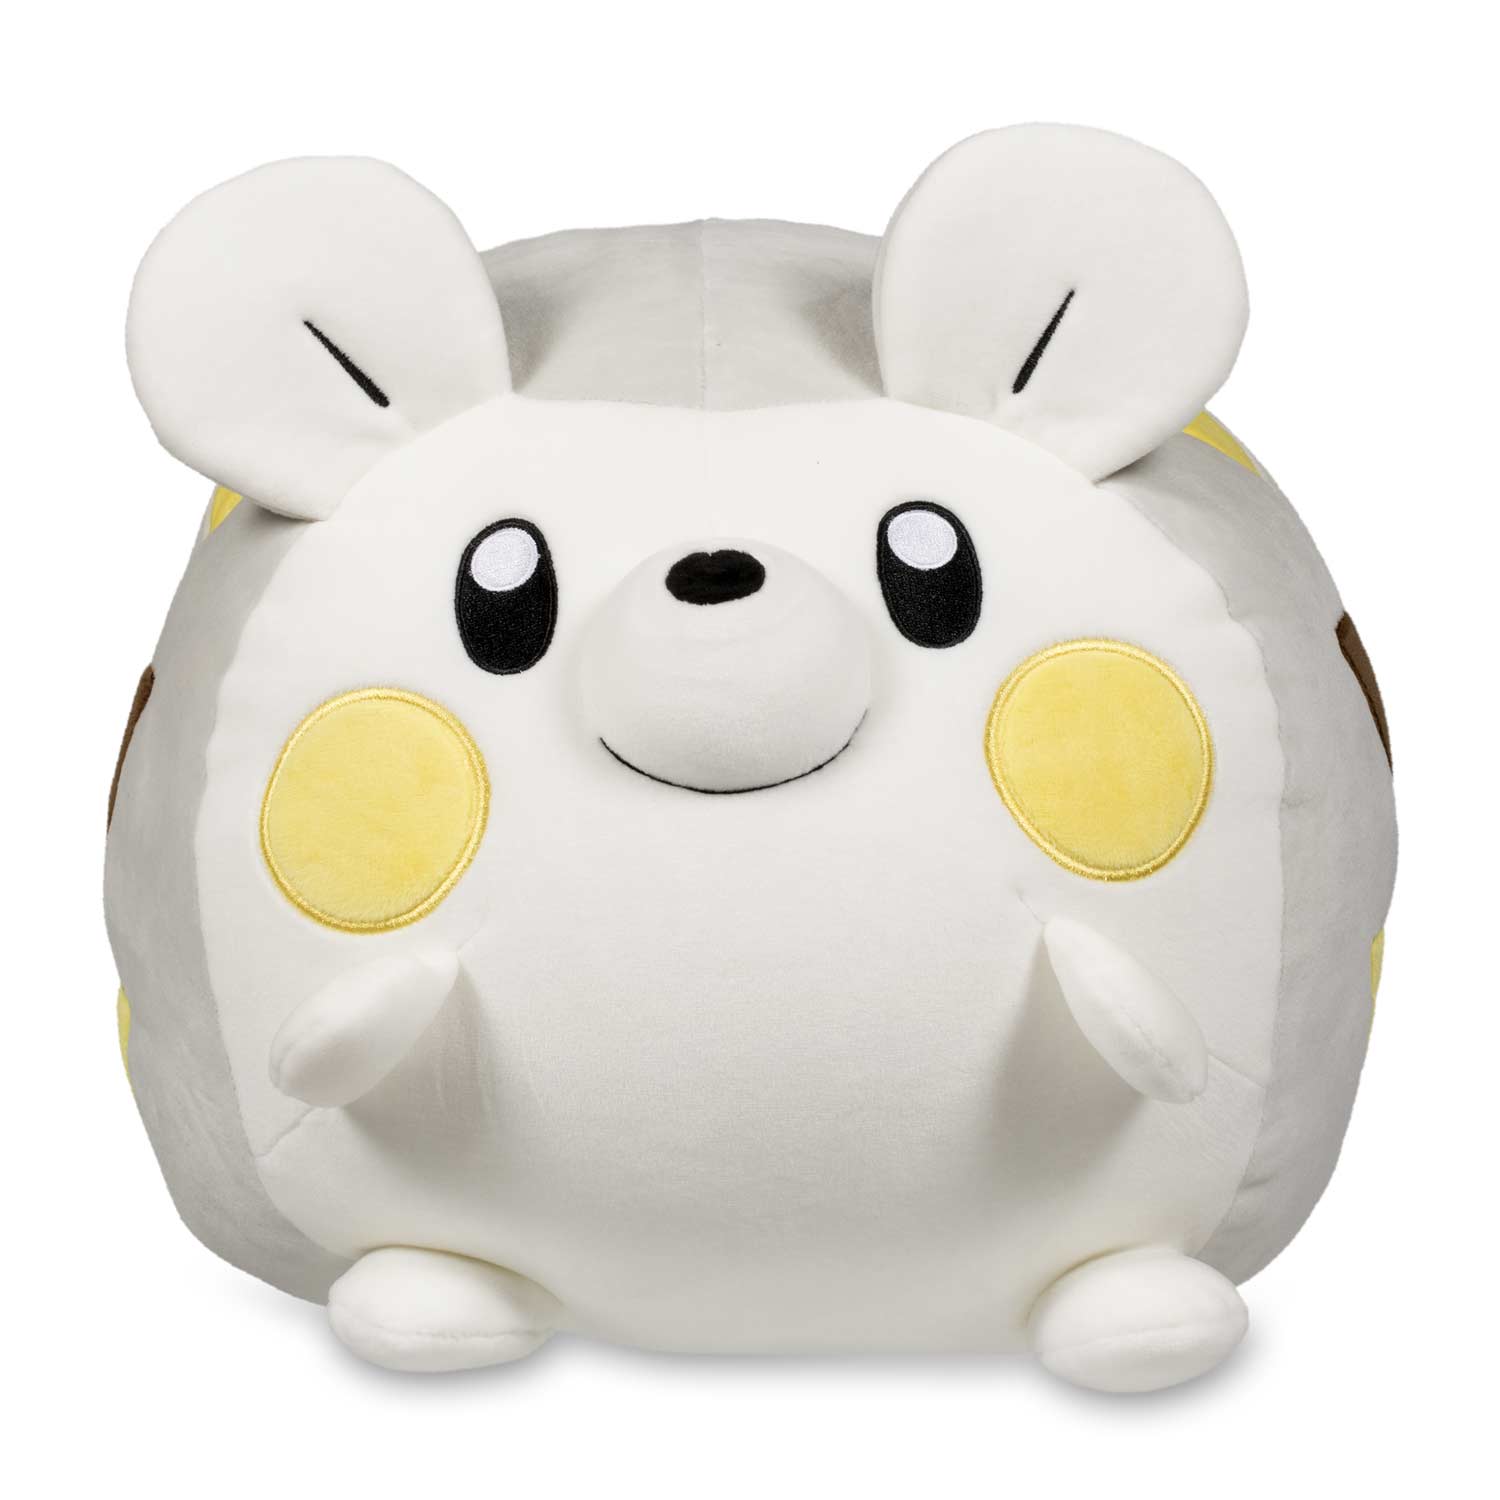 Togedemaru Squishy Plush 10 In Pokemon Center Official Site